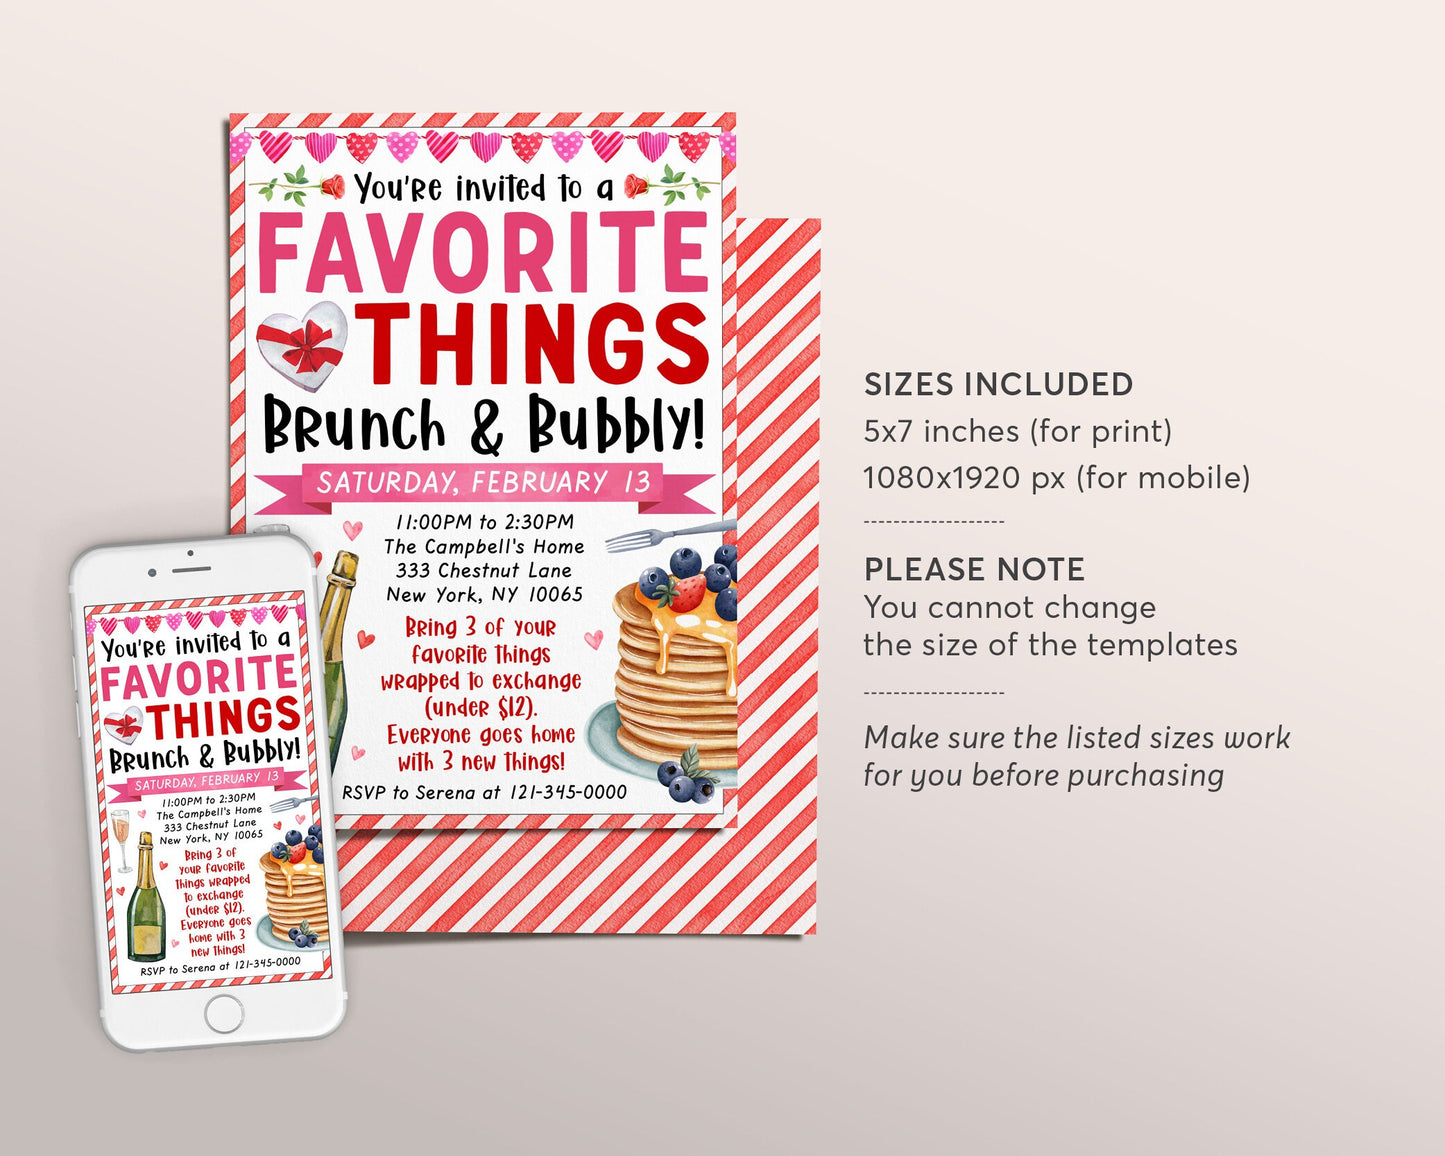 Valentines Day Brunch And Bubbly Invitation Editable Template, Galentine's Favorite Things Party Champagne Mimosas Breakfast Gift Exchange